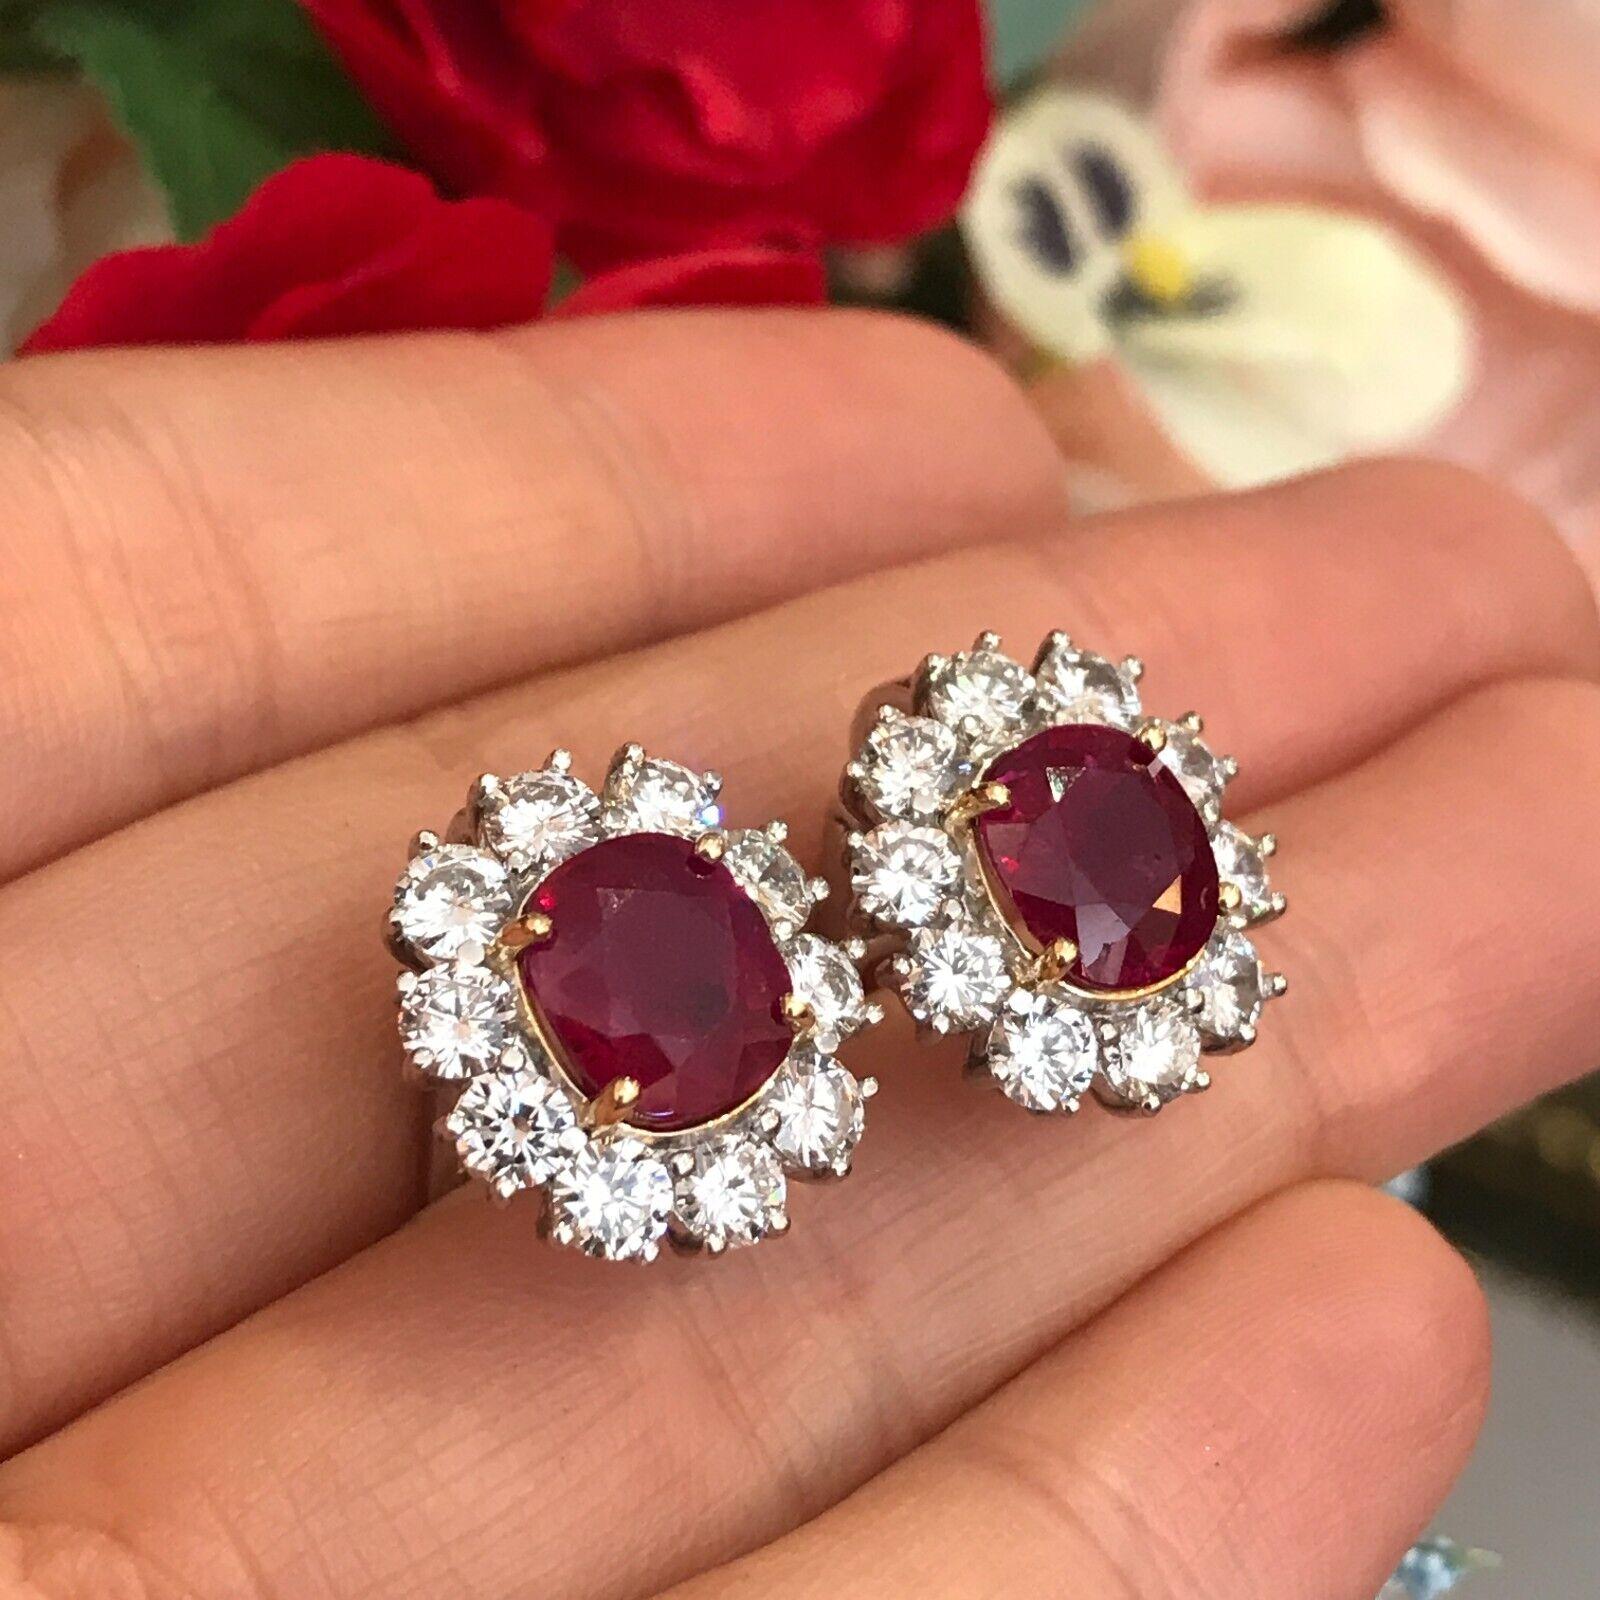 AGL Certified Unheated Cushion Ruby Earrings with Diamonds in Platinum
Features 
Two Natural Cushion shaped Rubies
weighing 5.97 carats in total
with AGL certificate (see photos)
Burma origin
Unheated

set in Platinum settings
with 18k Yellow Gold